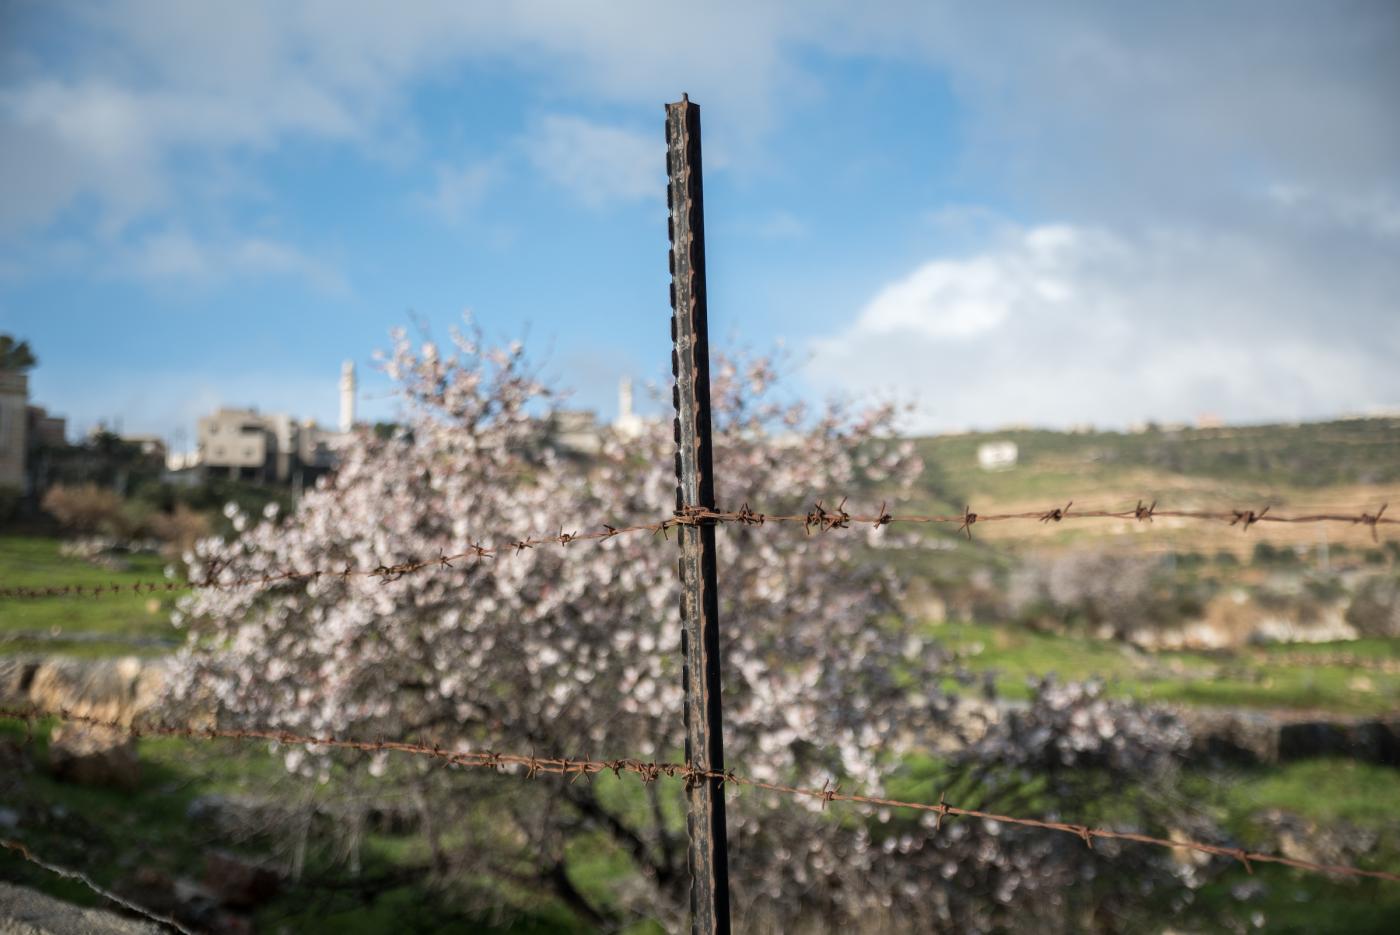 A fence beside the field with blooming bush